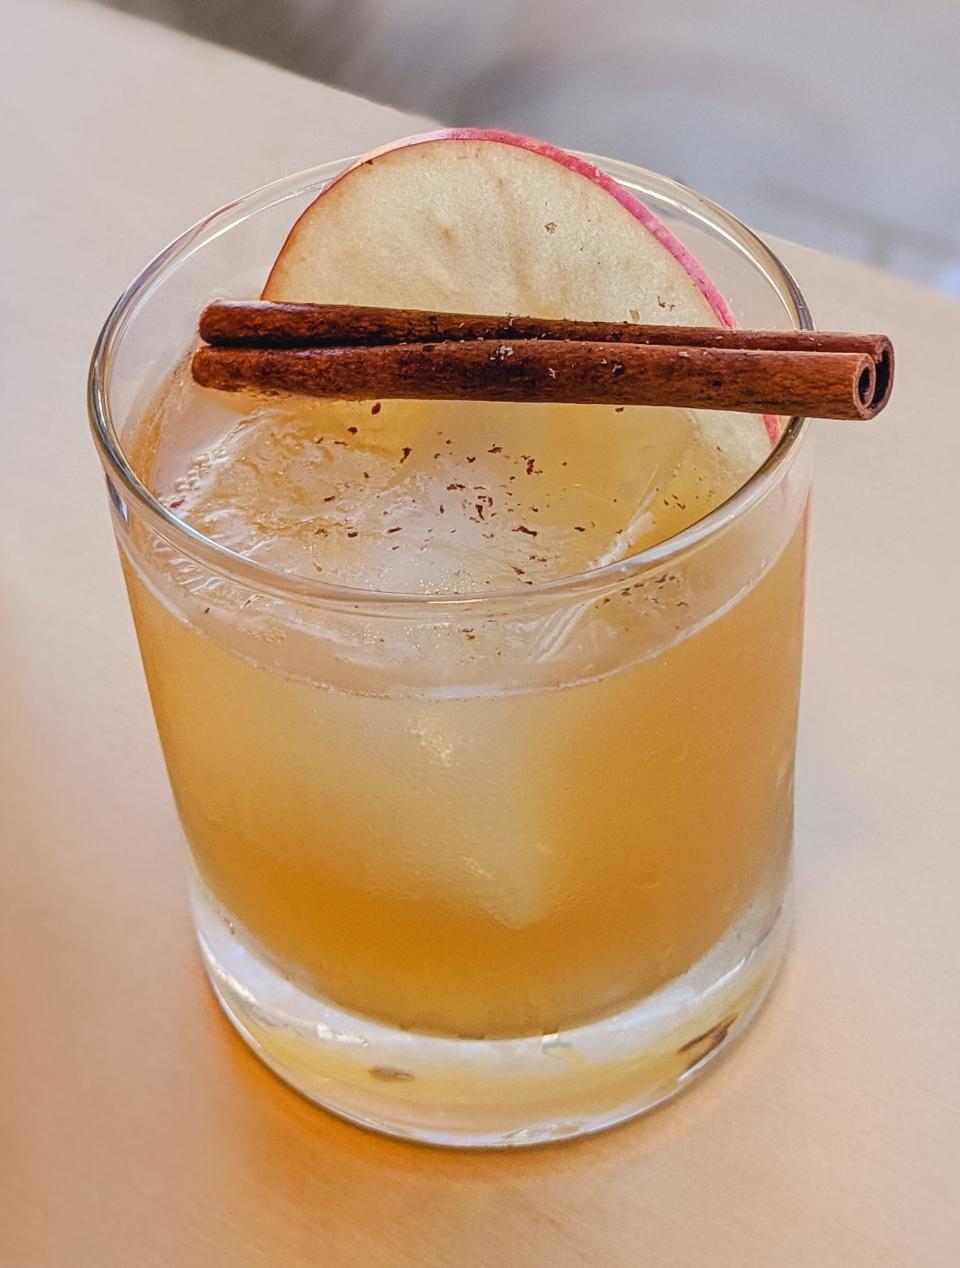 Crafted DIY Studio & Bar offers a spiked apple cider on its fall drink menu.